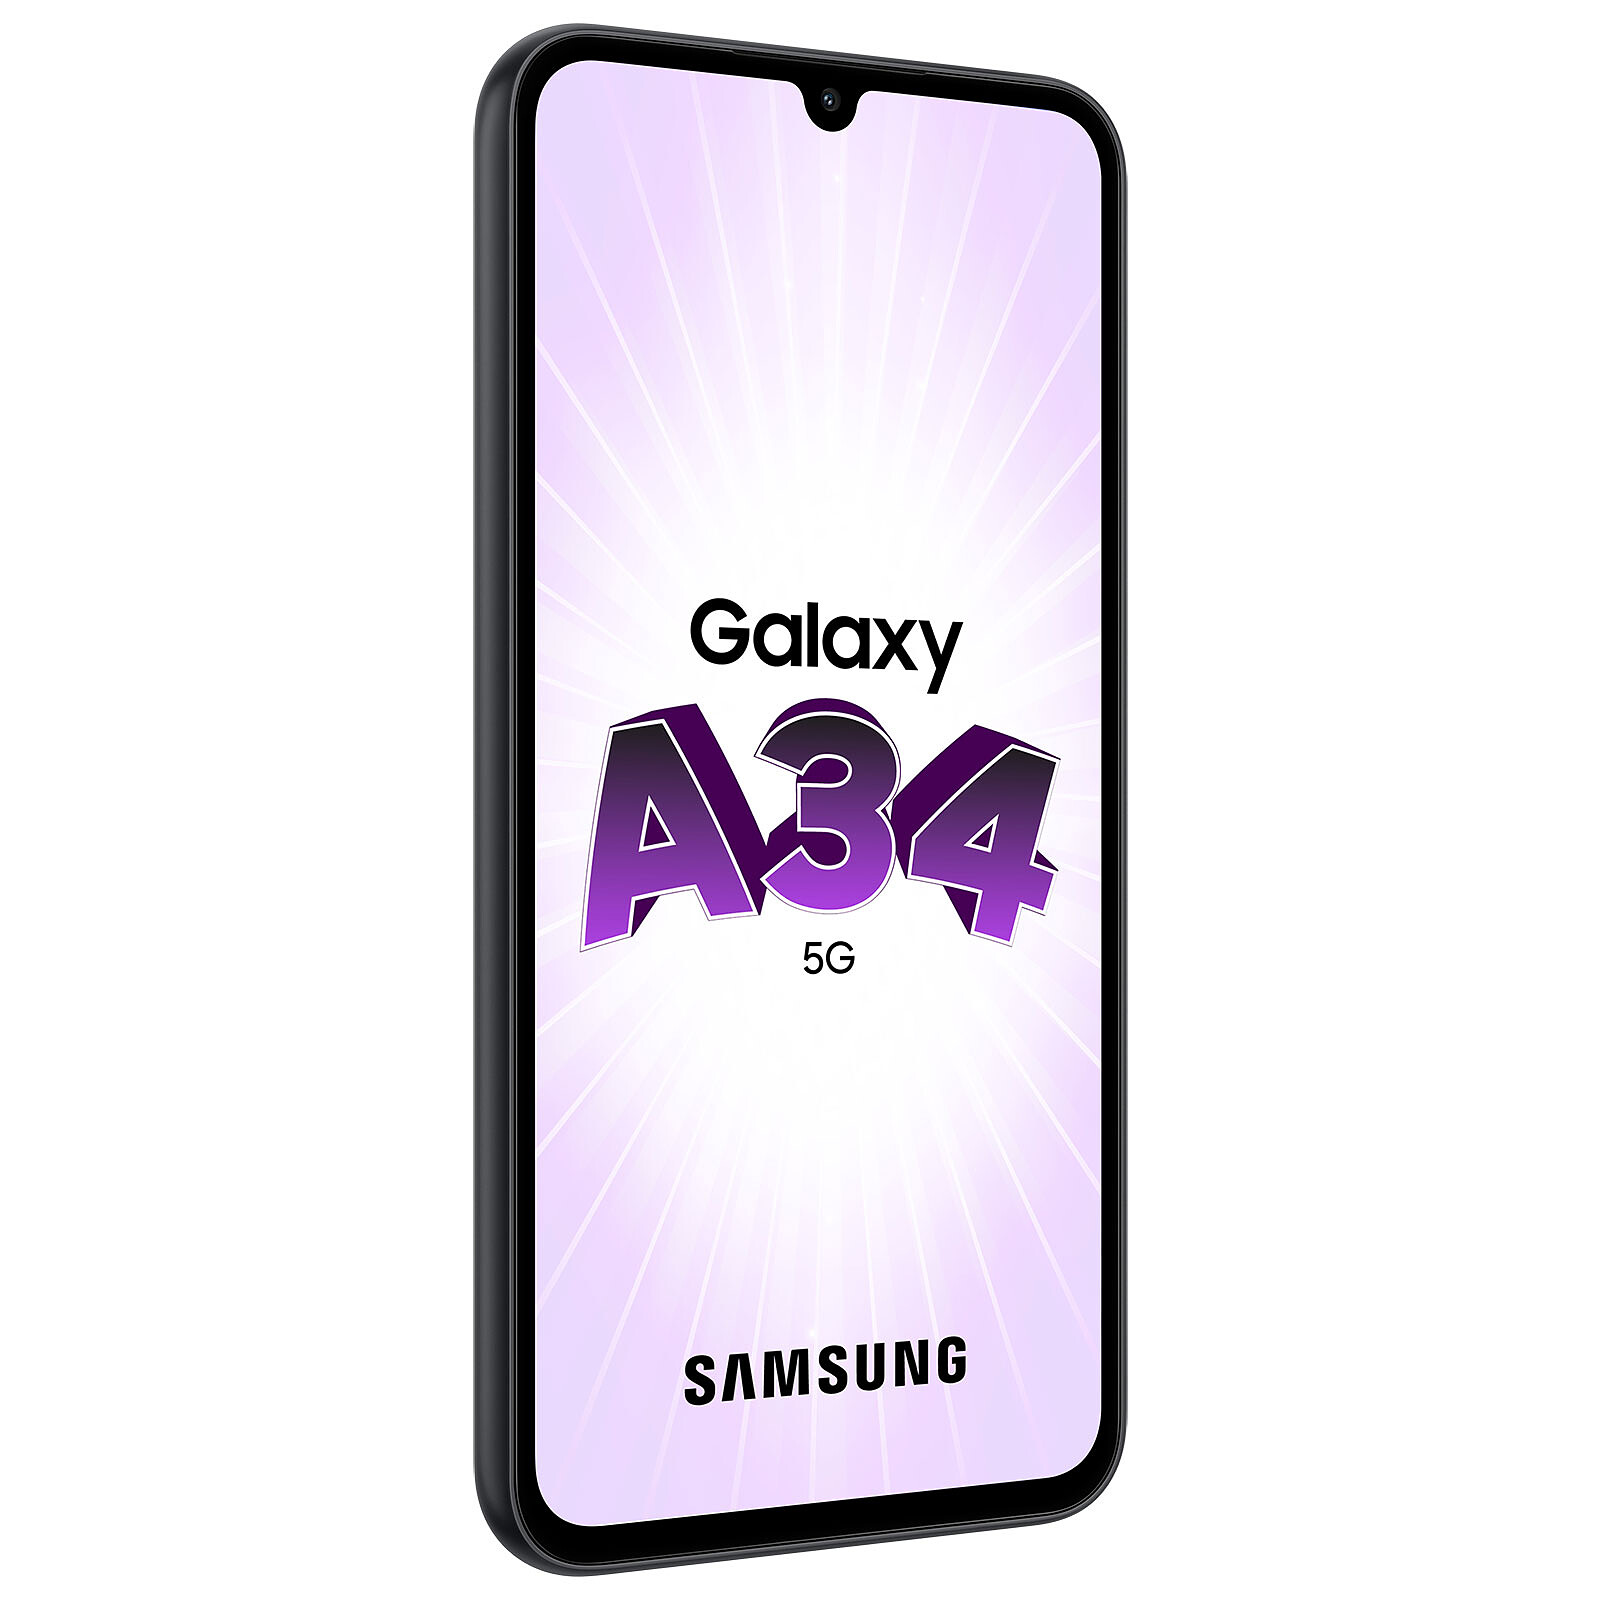 Samsung Galaxy A54 5G, Galaxy A34 5G With 120Hz Display, 5,000mAh Battery  Launched: Price, Specifications